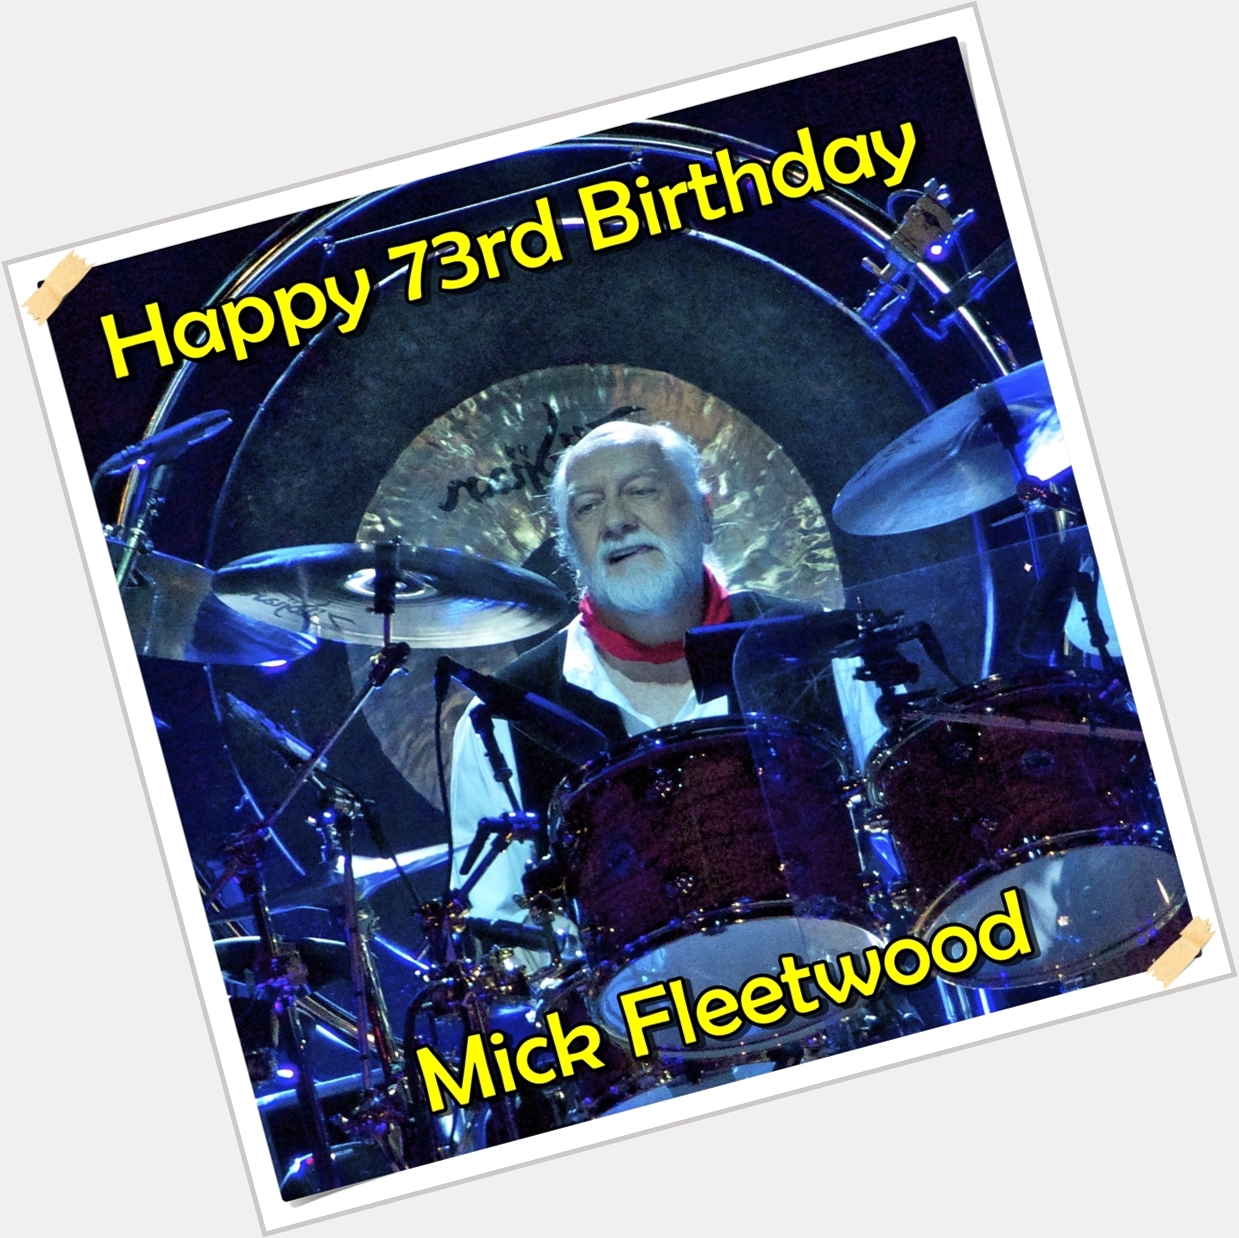 Happy 73rd Birthday Mick Fleetwood of What is your FAVORITE Mac song? - 